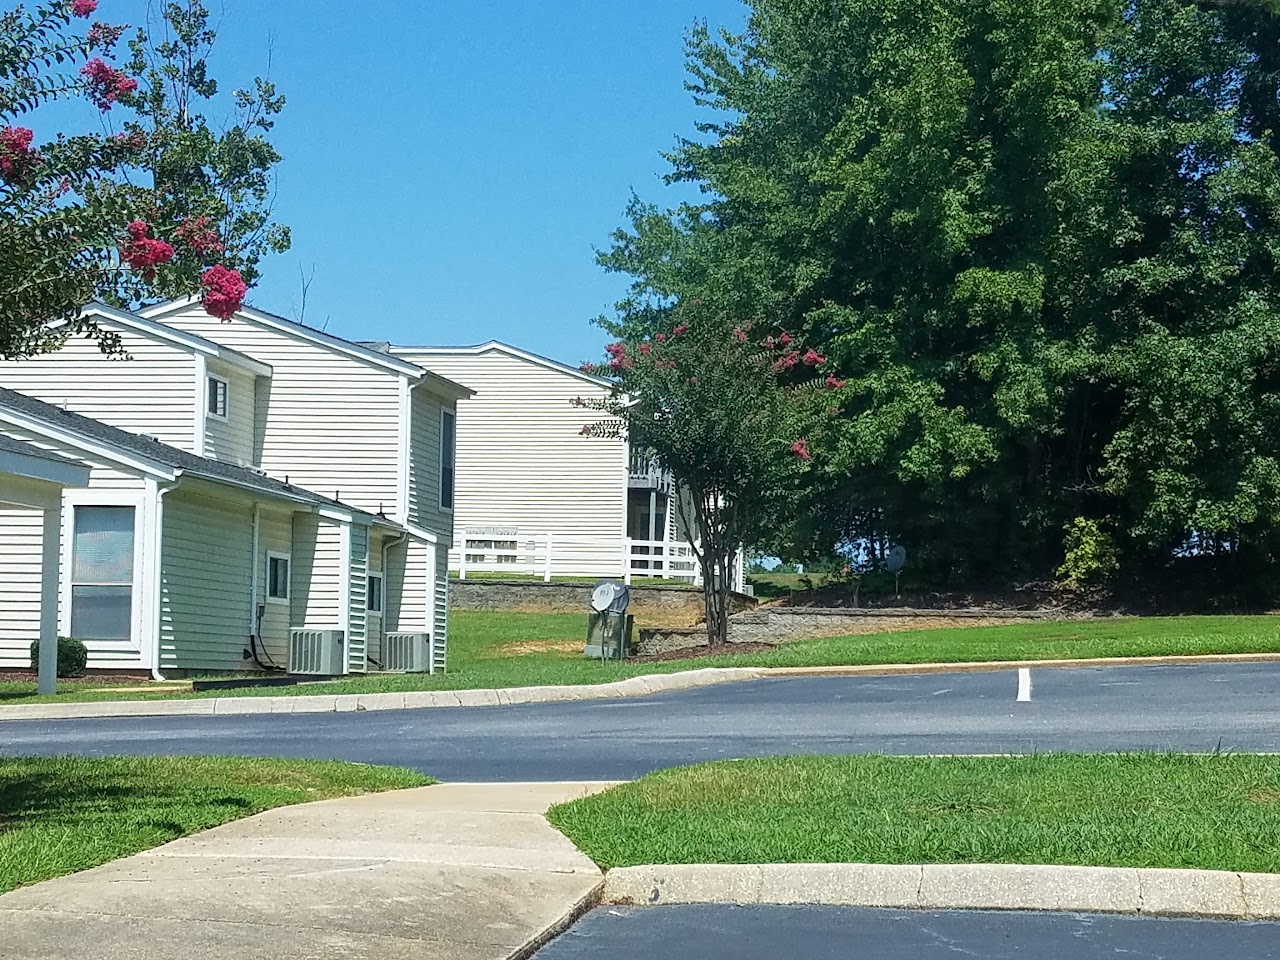 Photo of TIMBER SPRINGS APTS at 501 HOLLY SPRINGS RD HOLLY SPRINGS, NC 27540